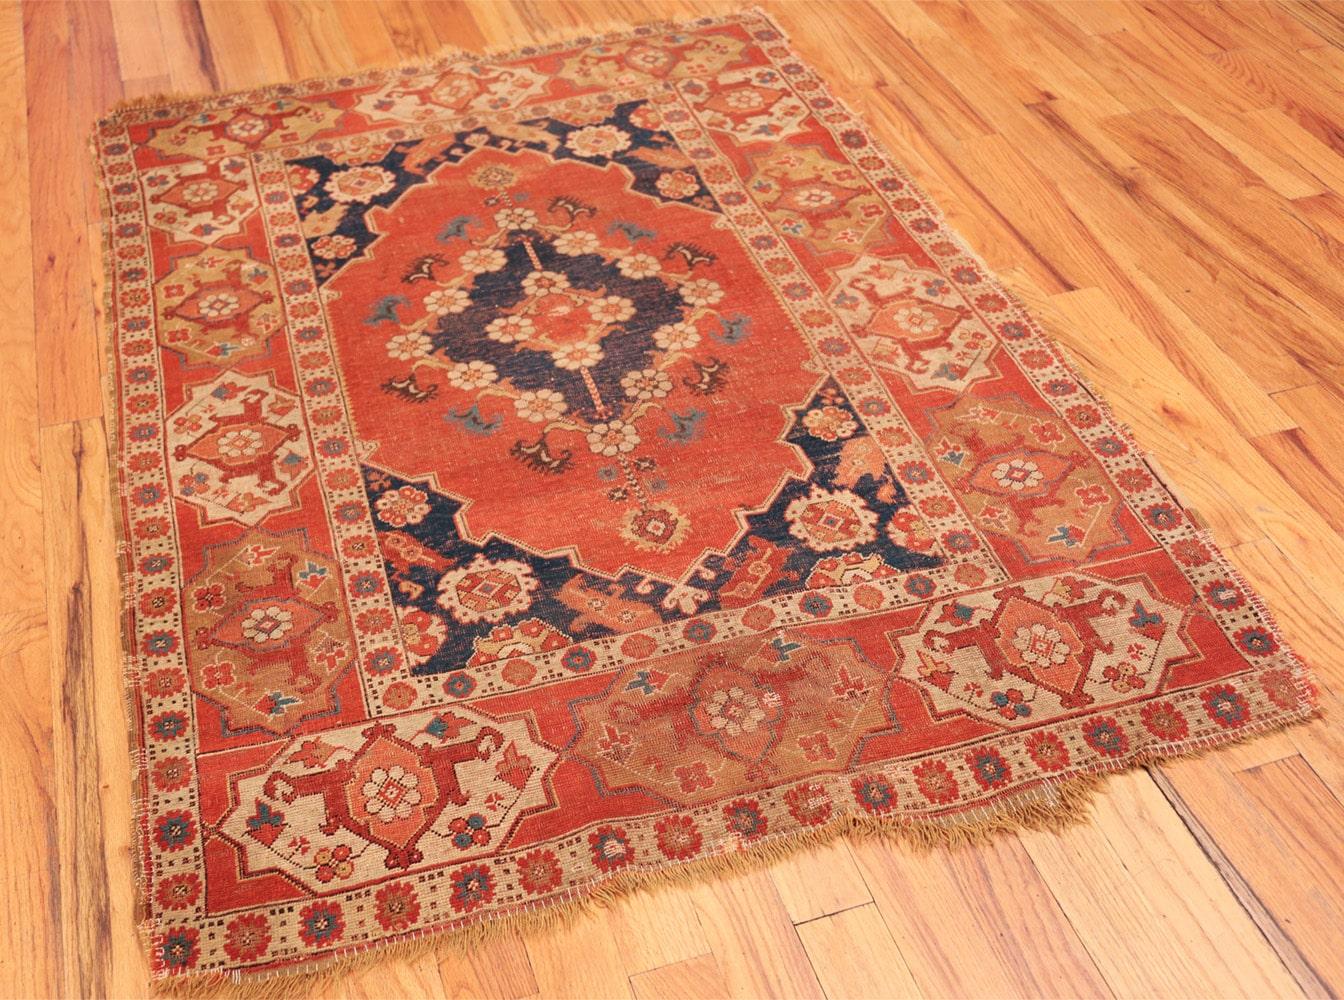 Romanian Antique 17th Century Transylvanian Rug.4 ft 2 in x 5 ft 9 in